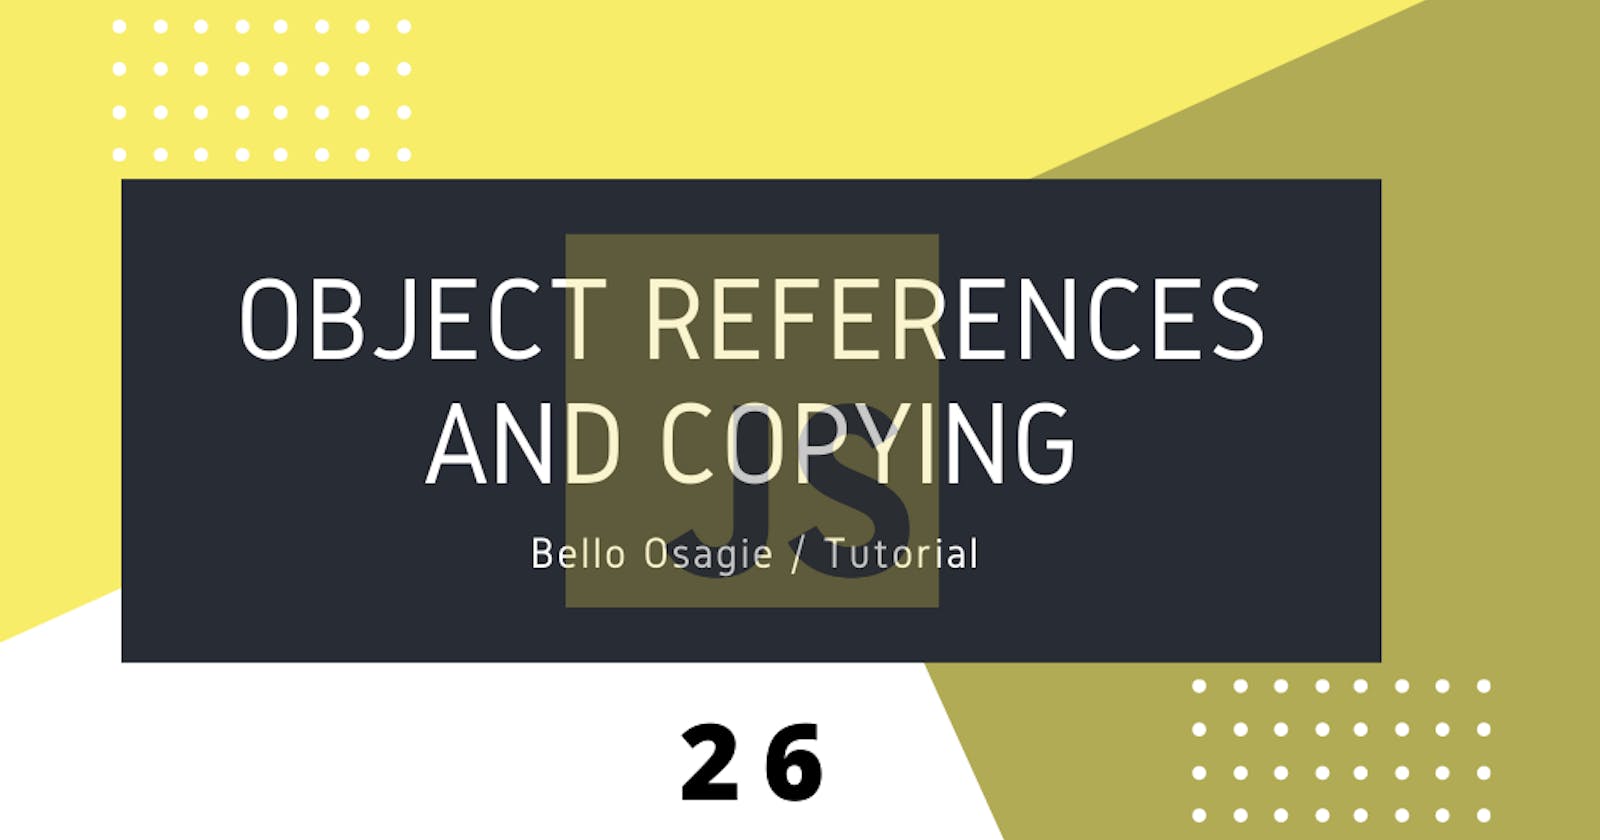 Object References and Copying